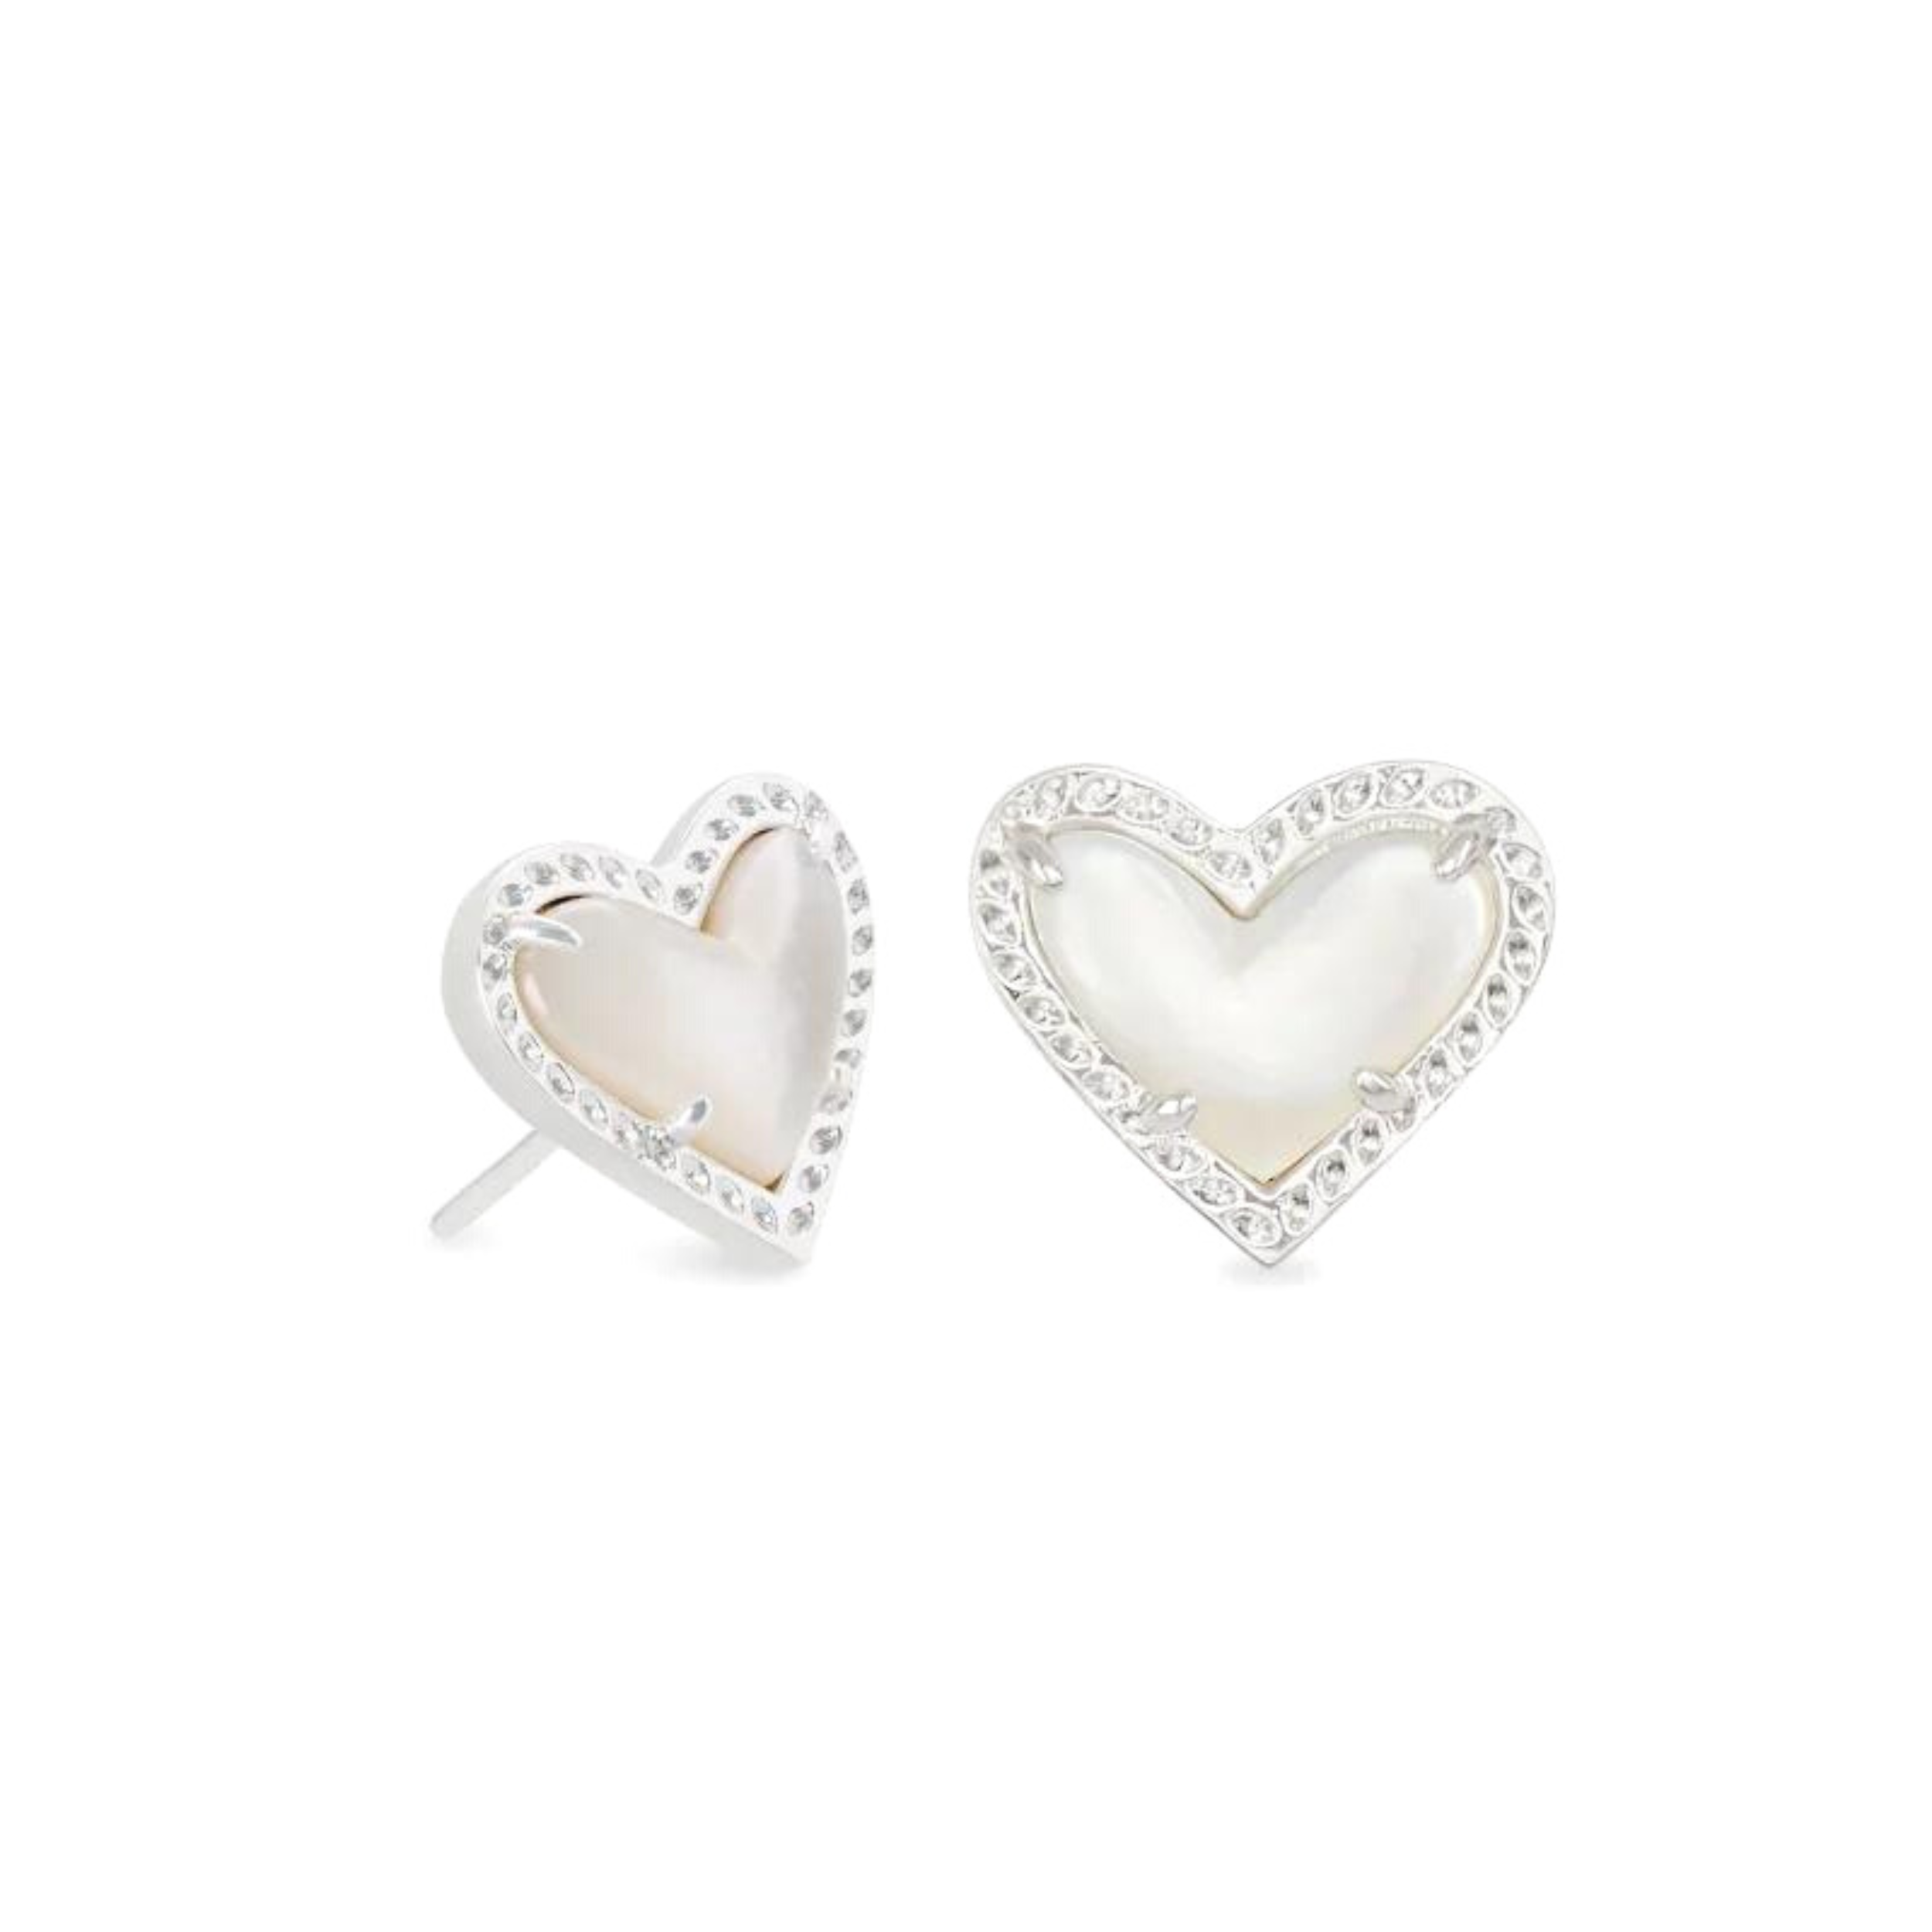 Kendra Scott | Ari Heart Silver Stud Earrings in Ivory Mother of Pearl - Giddy Up Glamour Boutique